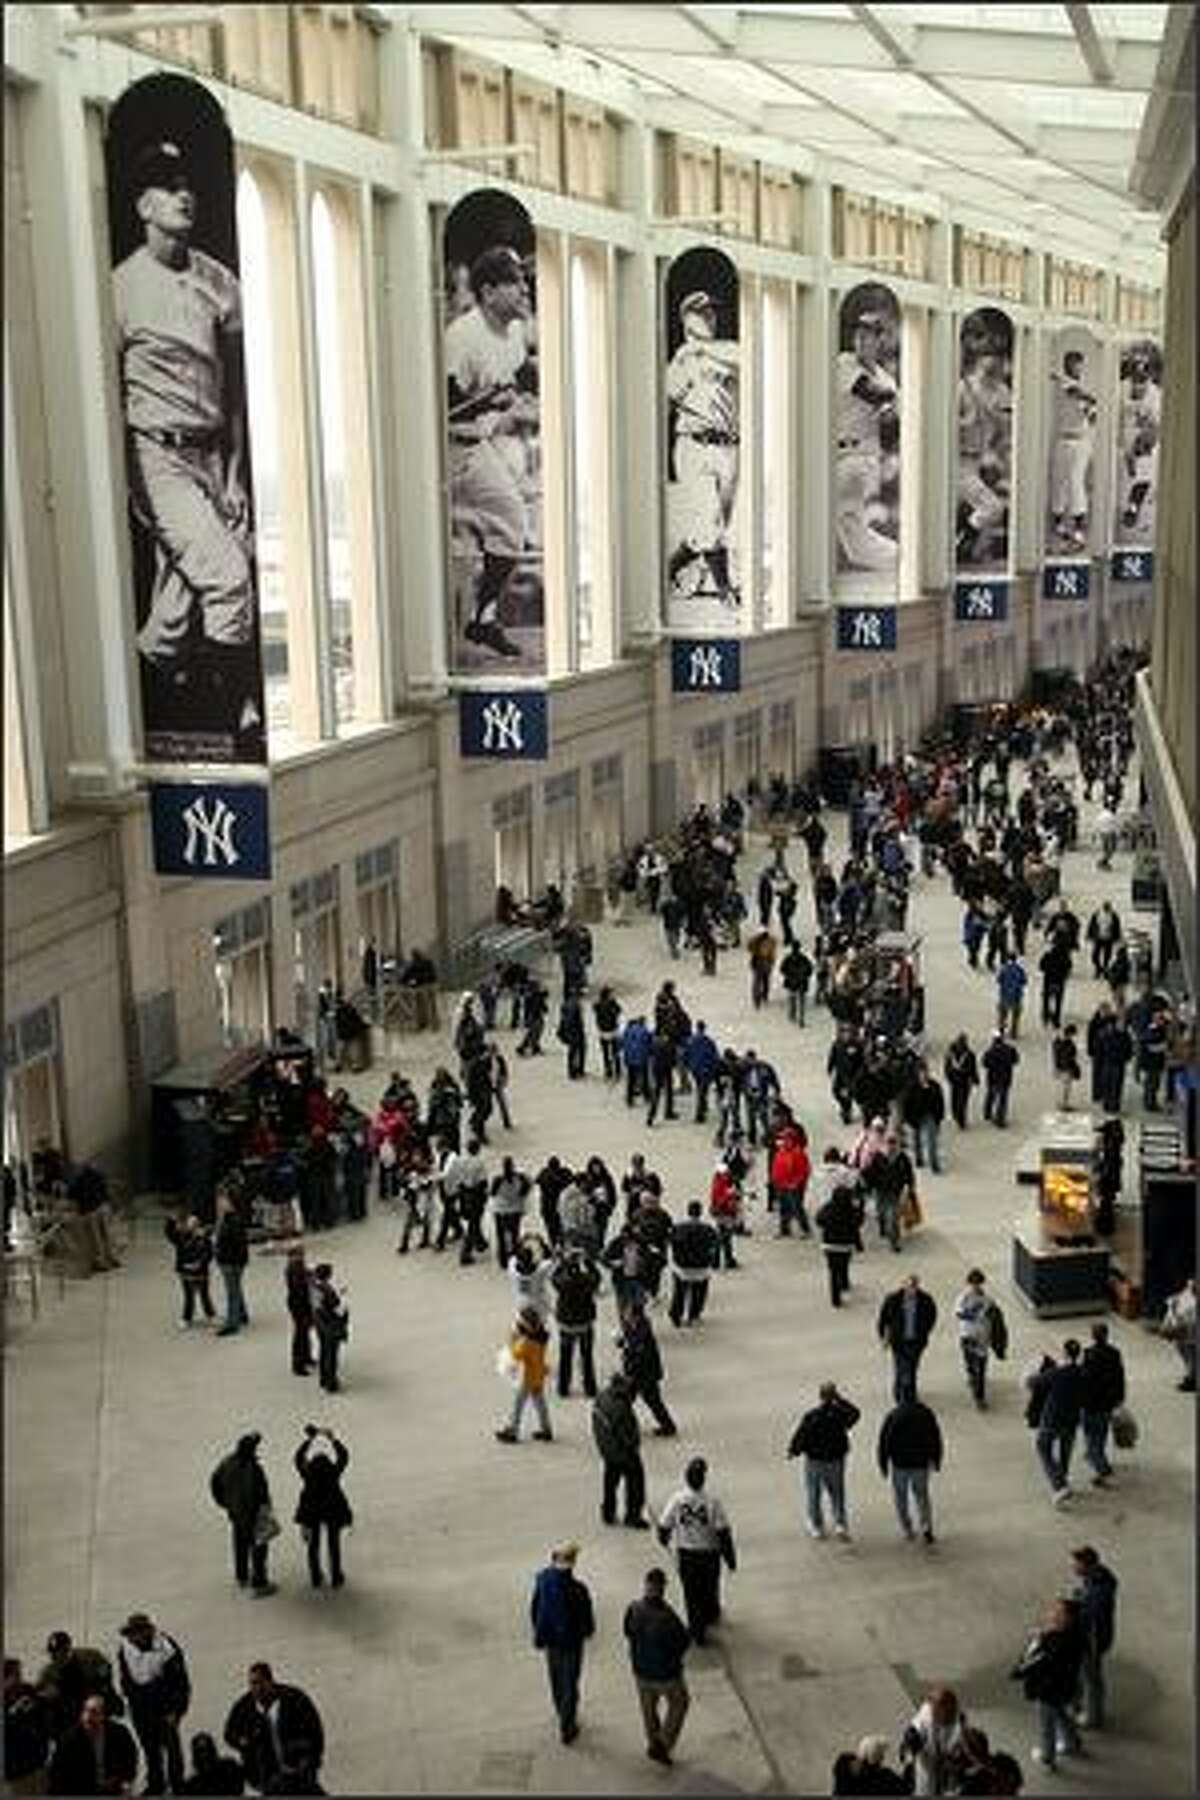 Spectators walk through the Great Hall of the new Yankee Stadium before the New York Yankees' exhibition game against the Chicago Cubs on Friday in the Bronx borough of New York. The game marked the first time the Yankees played in their new ballpark.